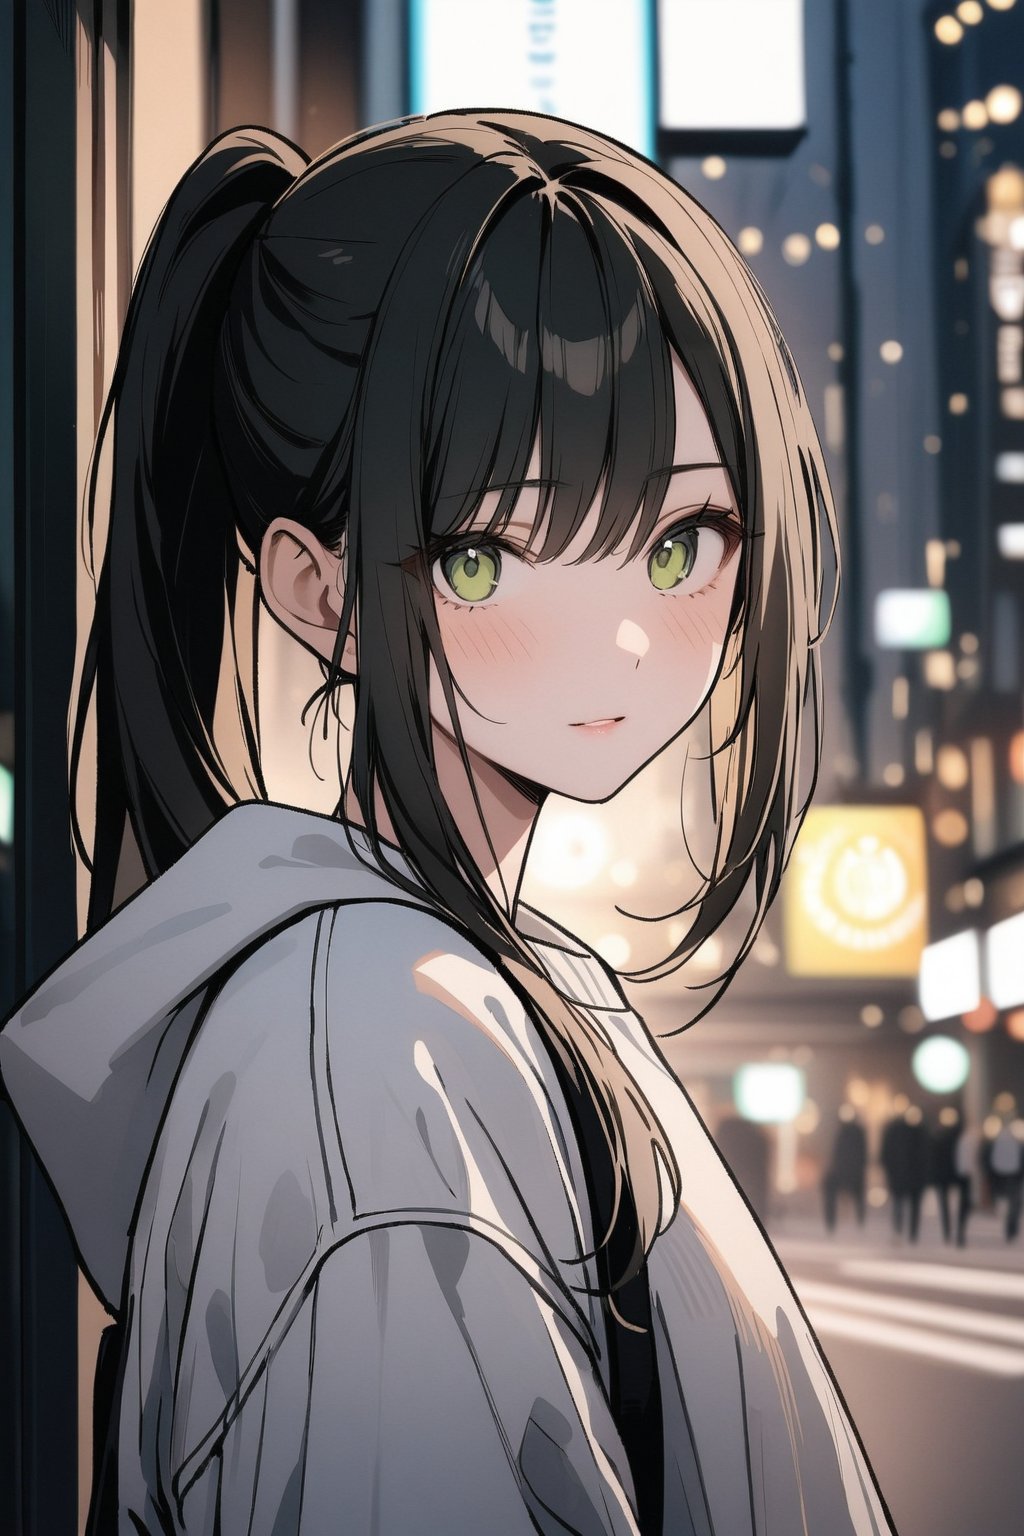 1girl, solo_female, long hair, black hair, ponytail, masterpiece, white sweatshirt, deep green eyes, cold expression, looking_at_the_viewer, wearing white denim shorts, portrait, tall girl, simple_background, outdoors in a city, starbucks, bright lighting, dramatic lighting, beautiful, lineart,txznf, standing